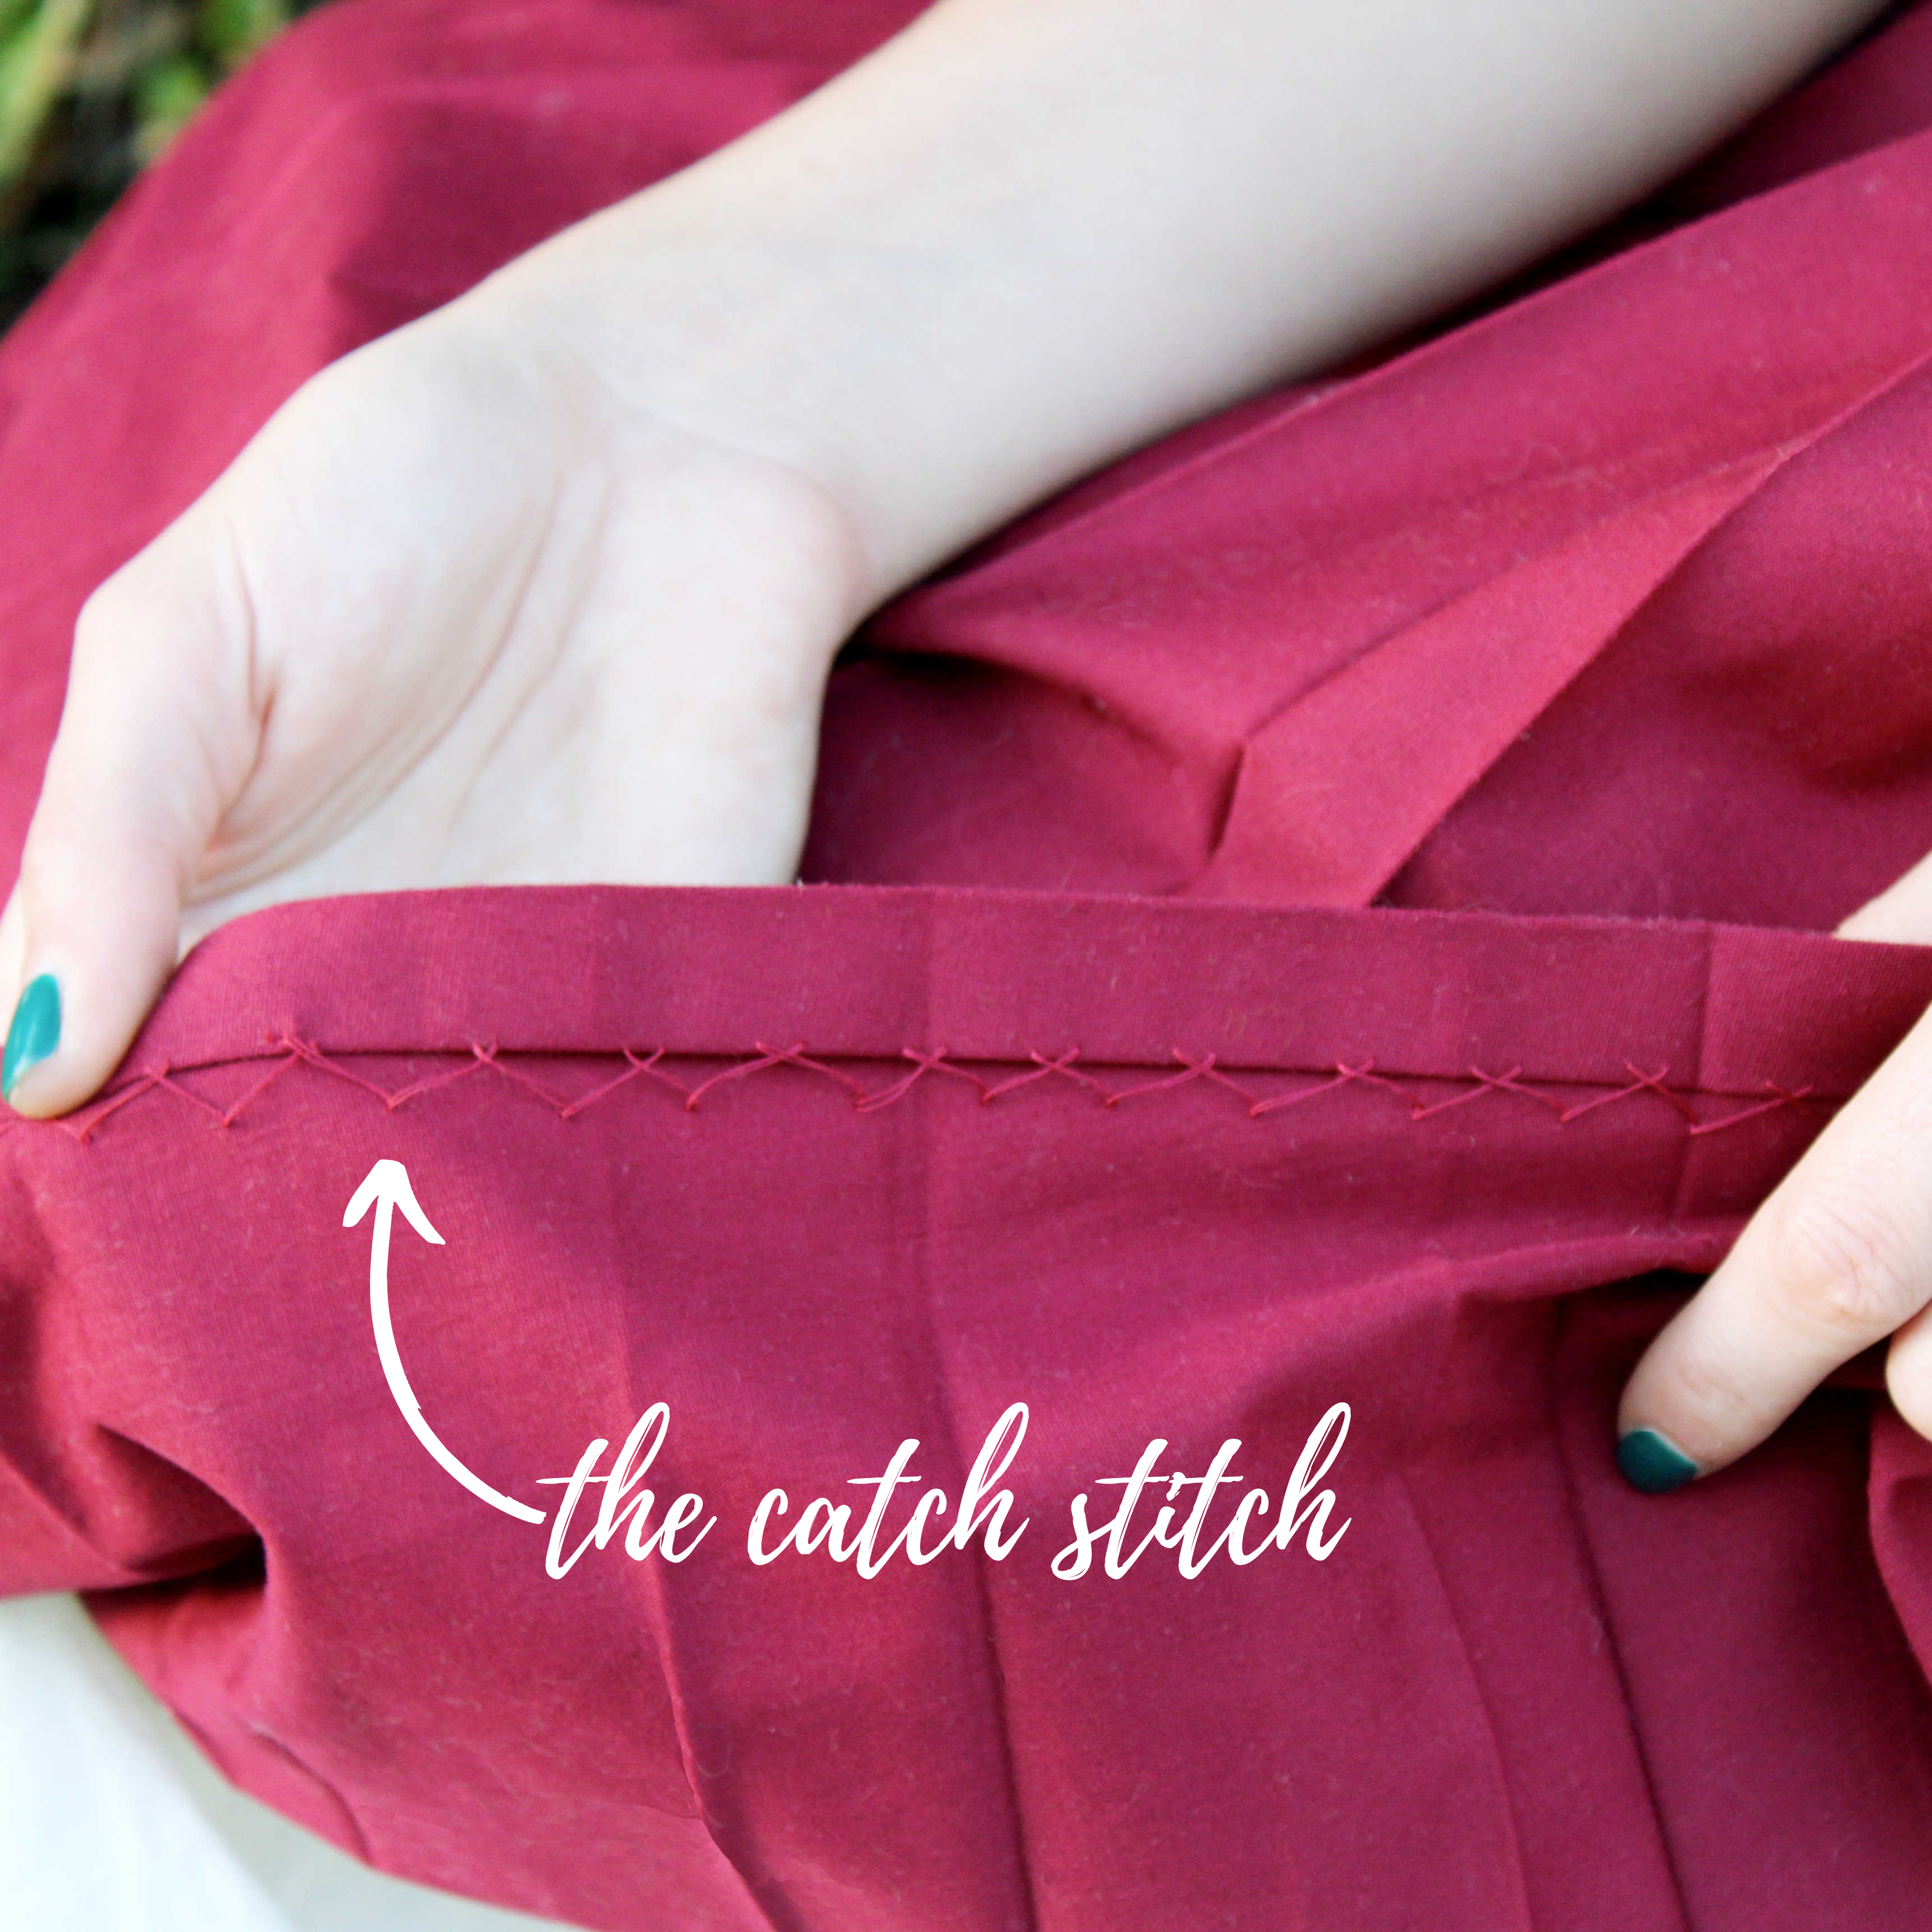 The Emma Skirt & How To Sew Pleats: The Catch Stitch